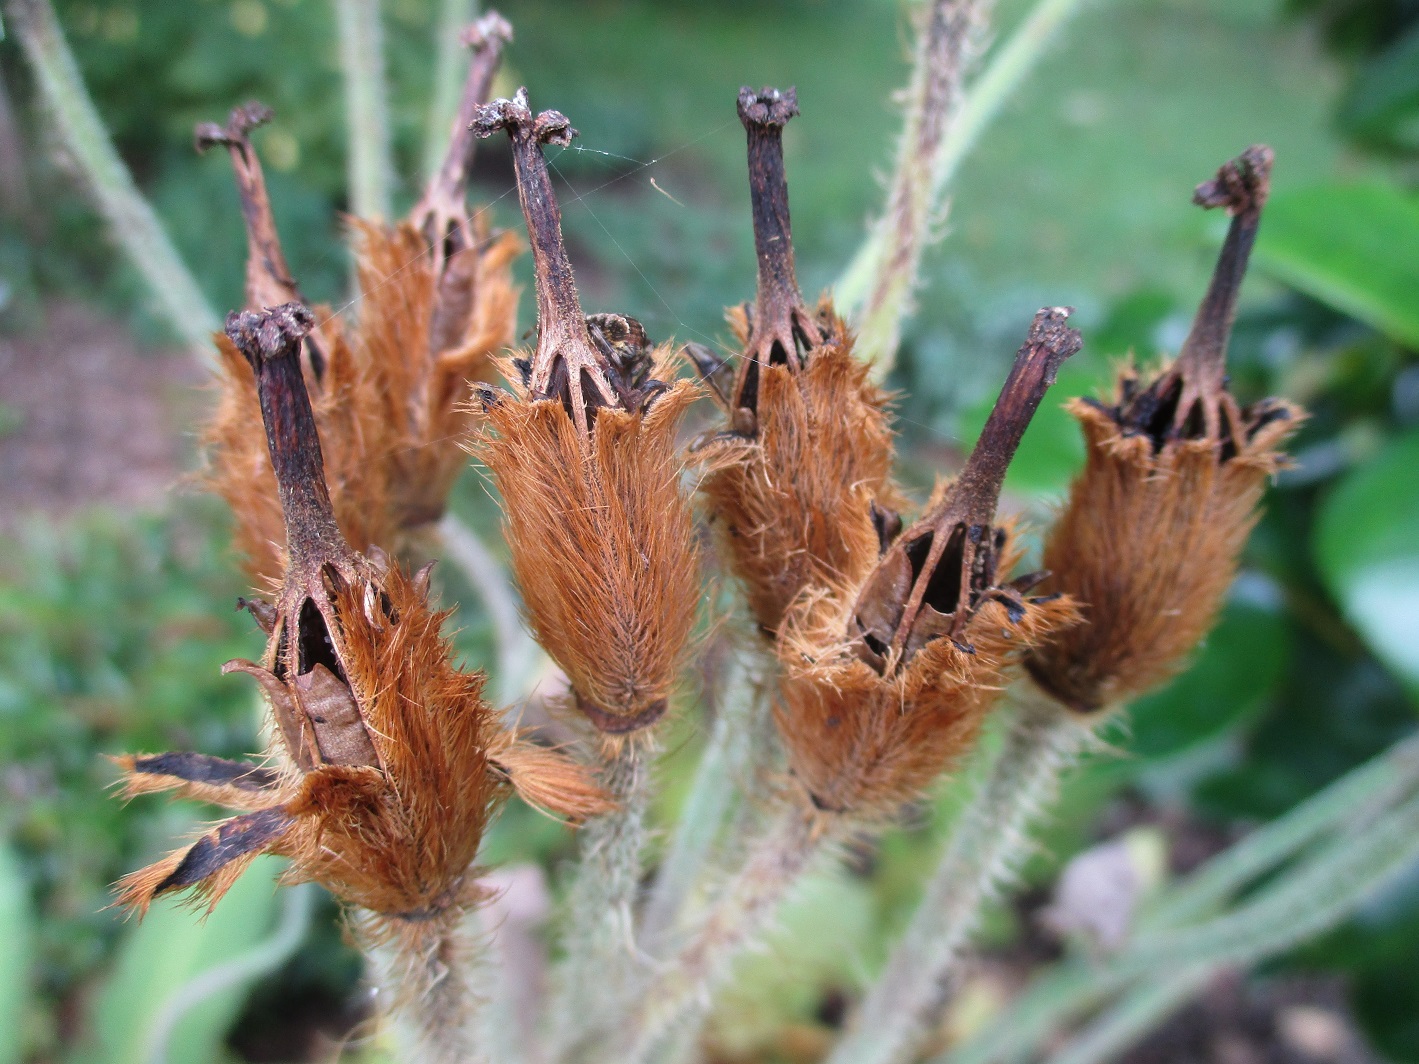 Meconopsis seed heads